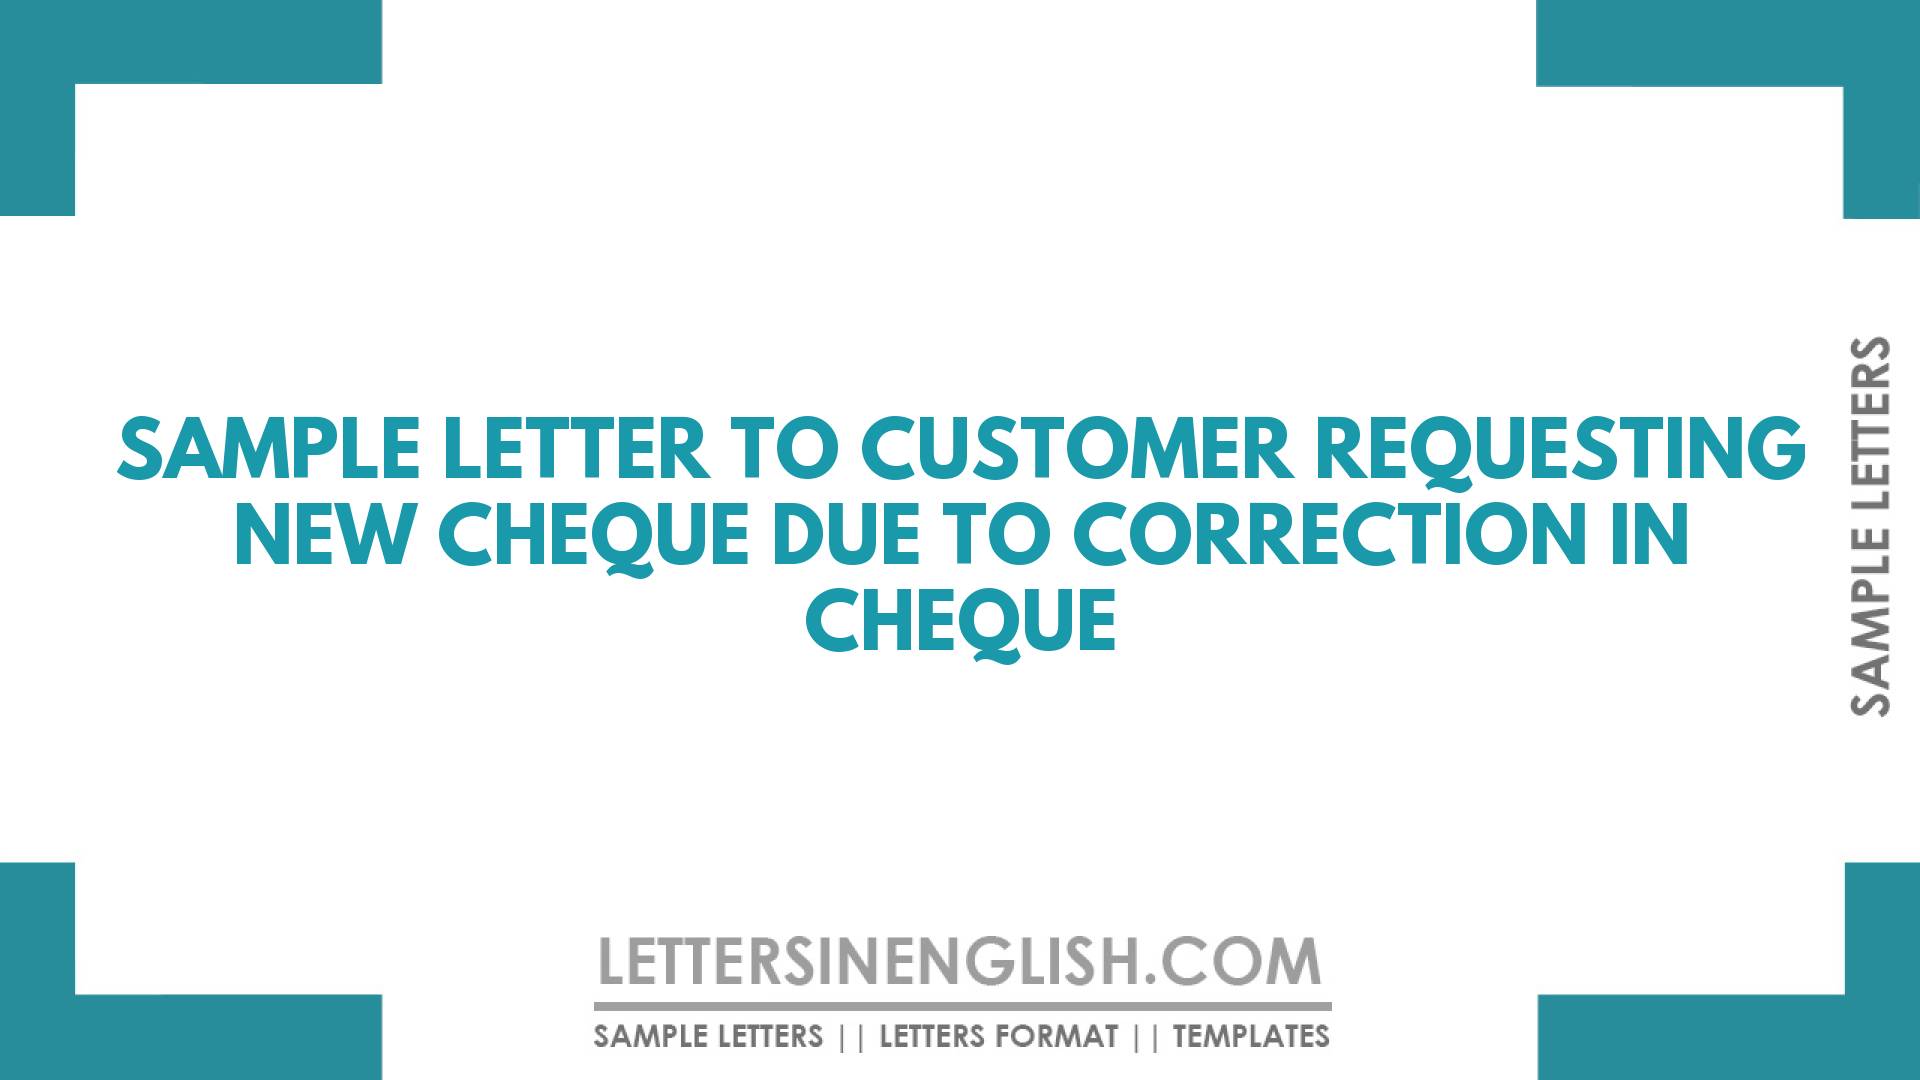 Sample Letter to Customer Requesting New Cheque Due to Correction in Cheque